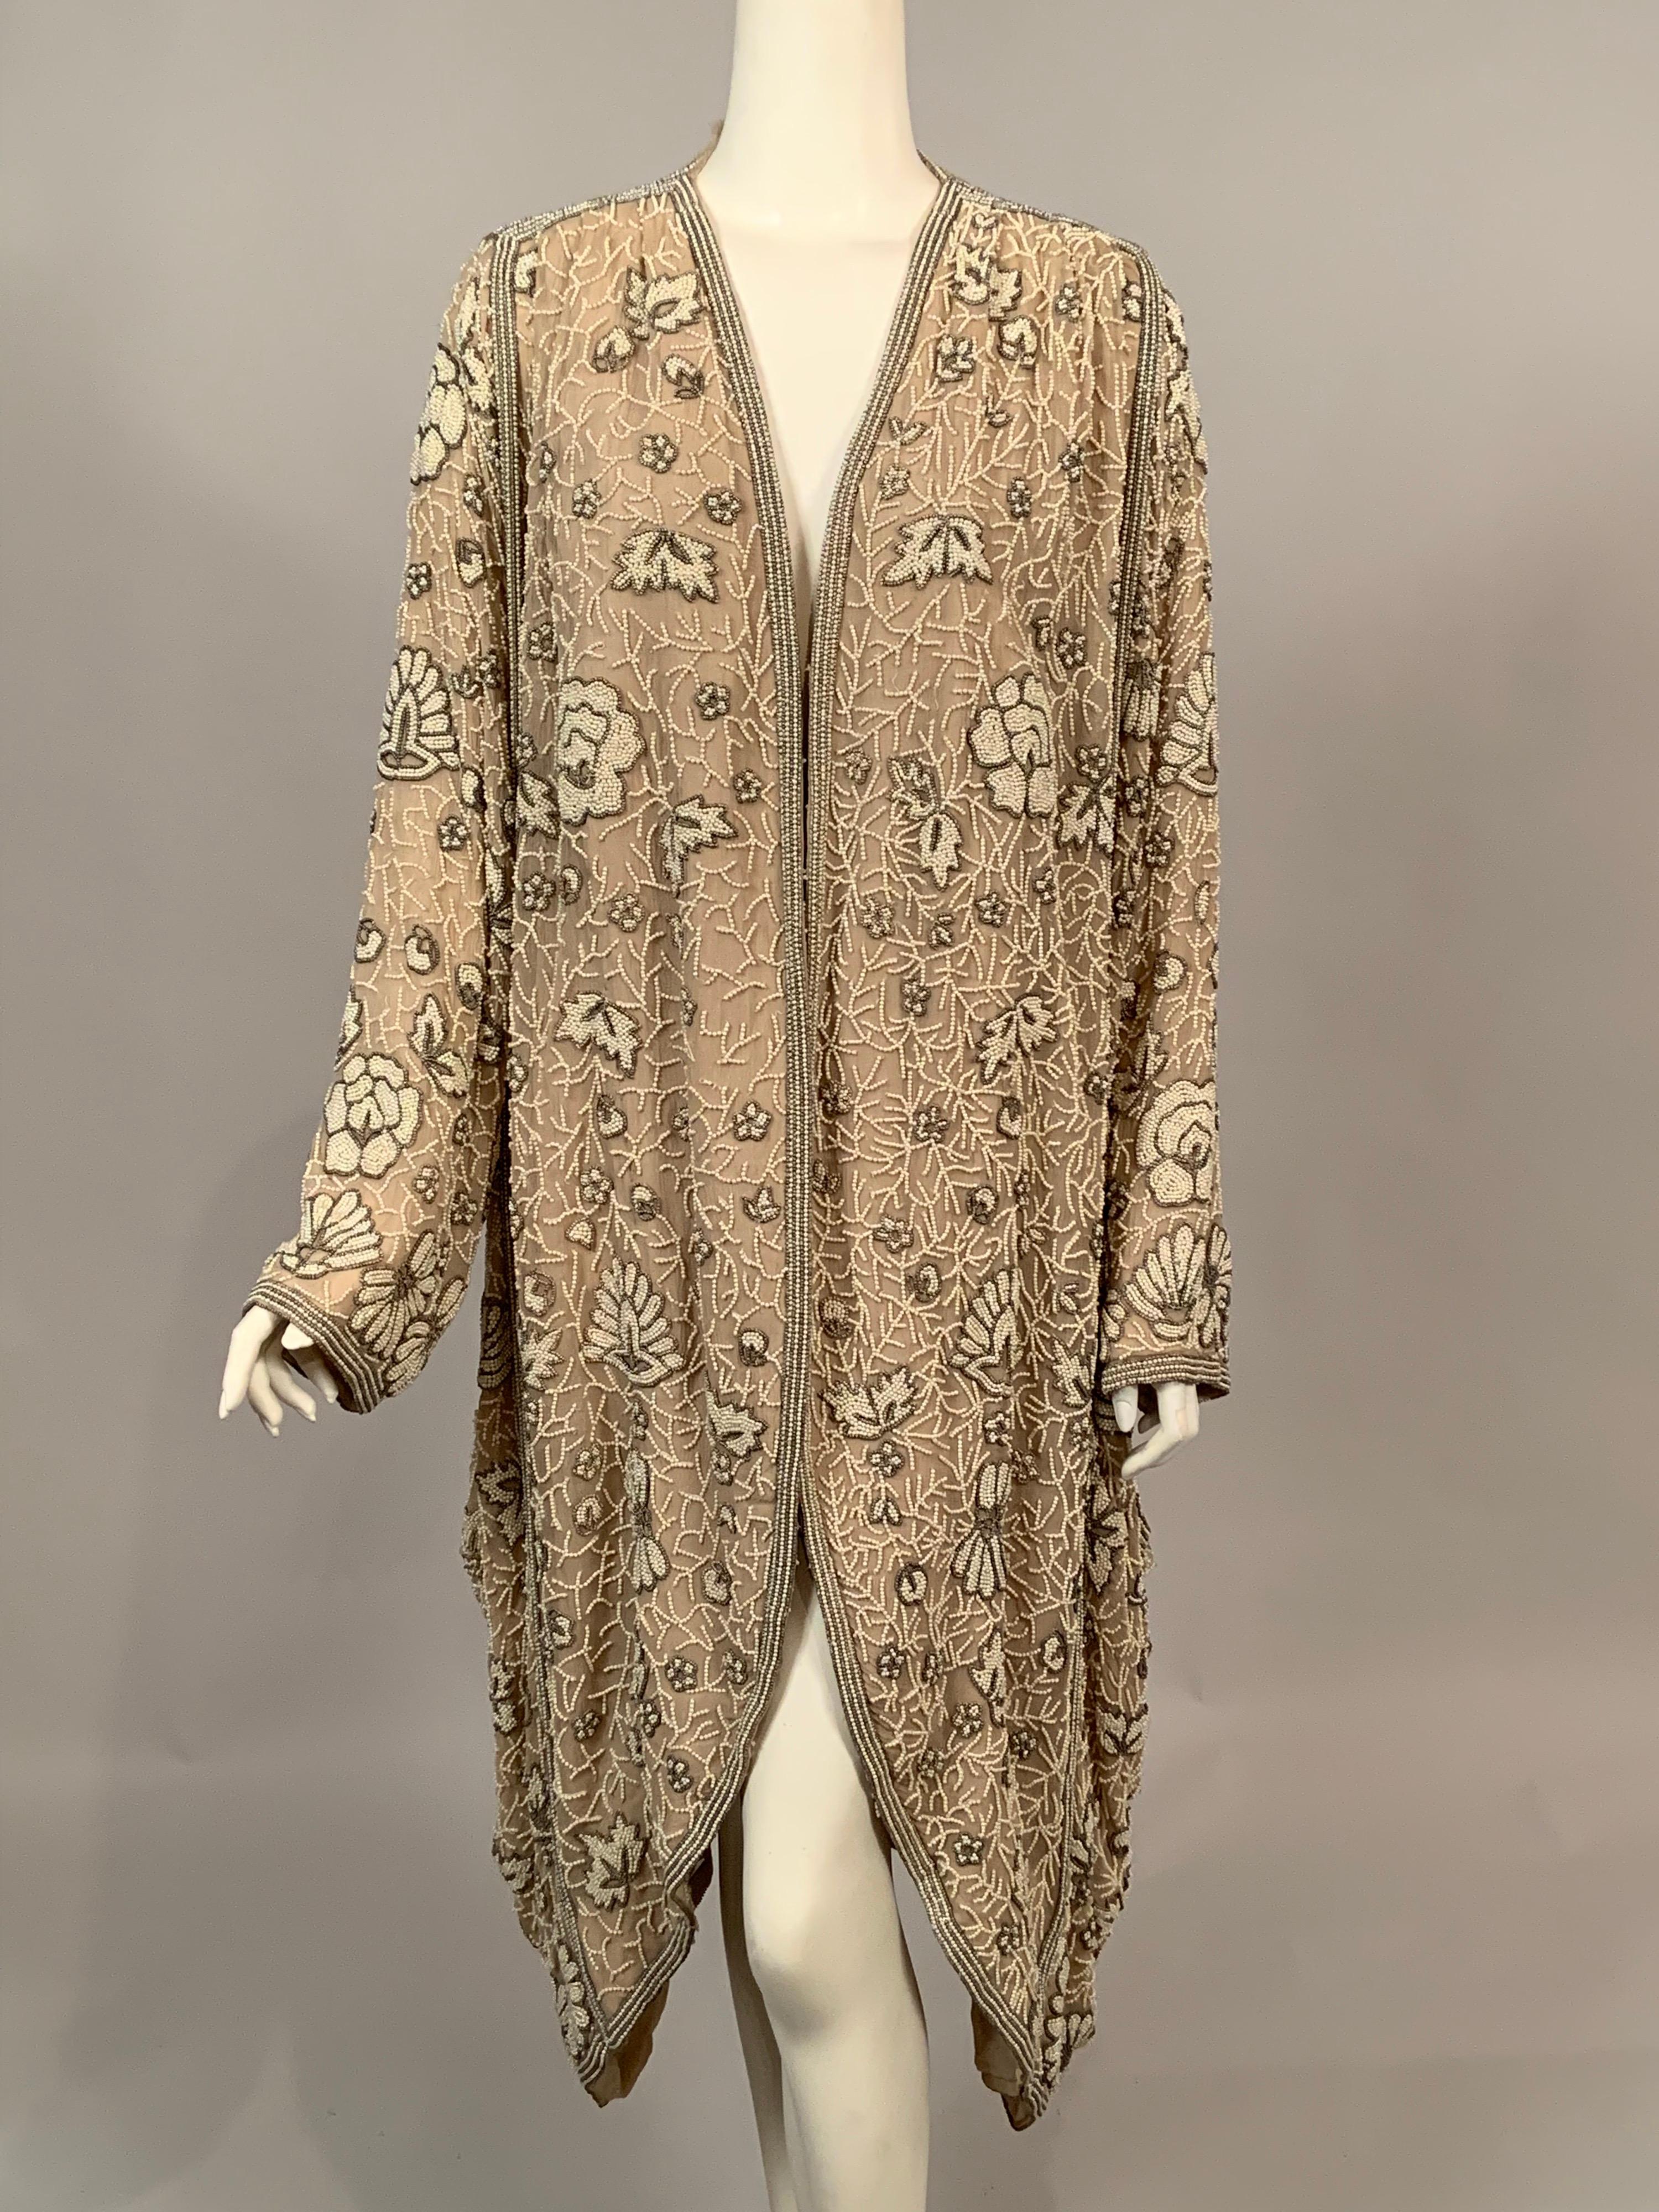 The wonderful shape and style of this chiffon coat is so evocative of the clothing worn by the elegant and affluent Crawley family in the PBS series and the movie Downton Abbey. The beige chiffon drapes beautifully on both sides, with layered beaded